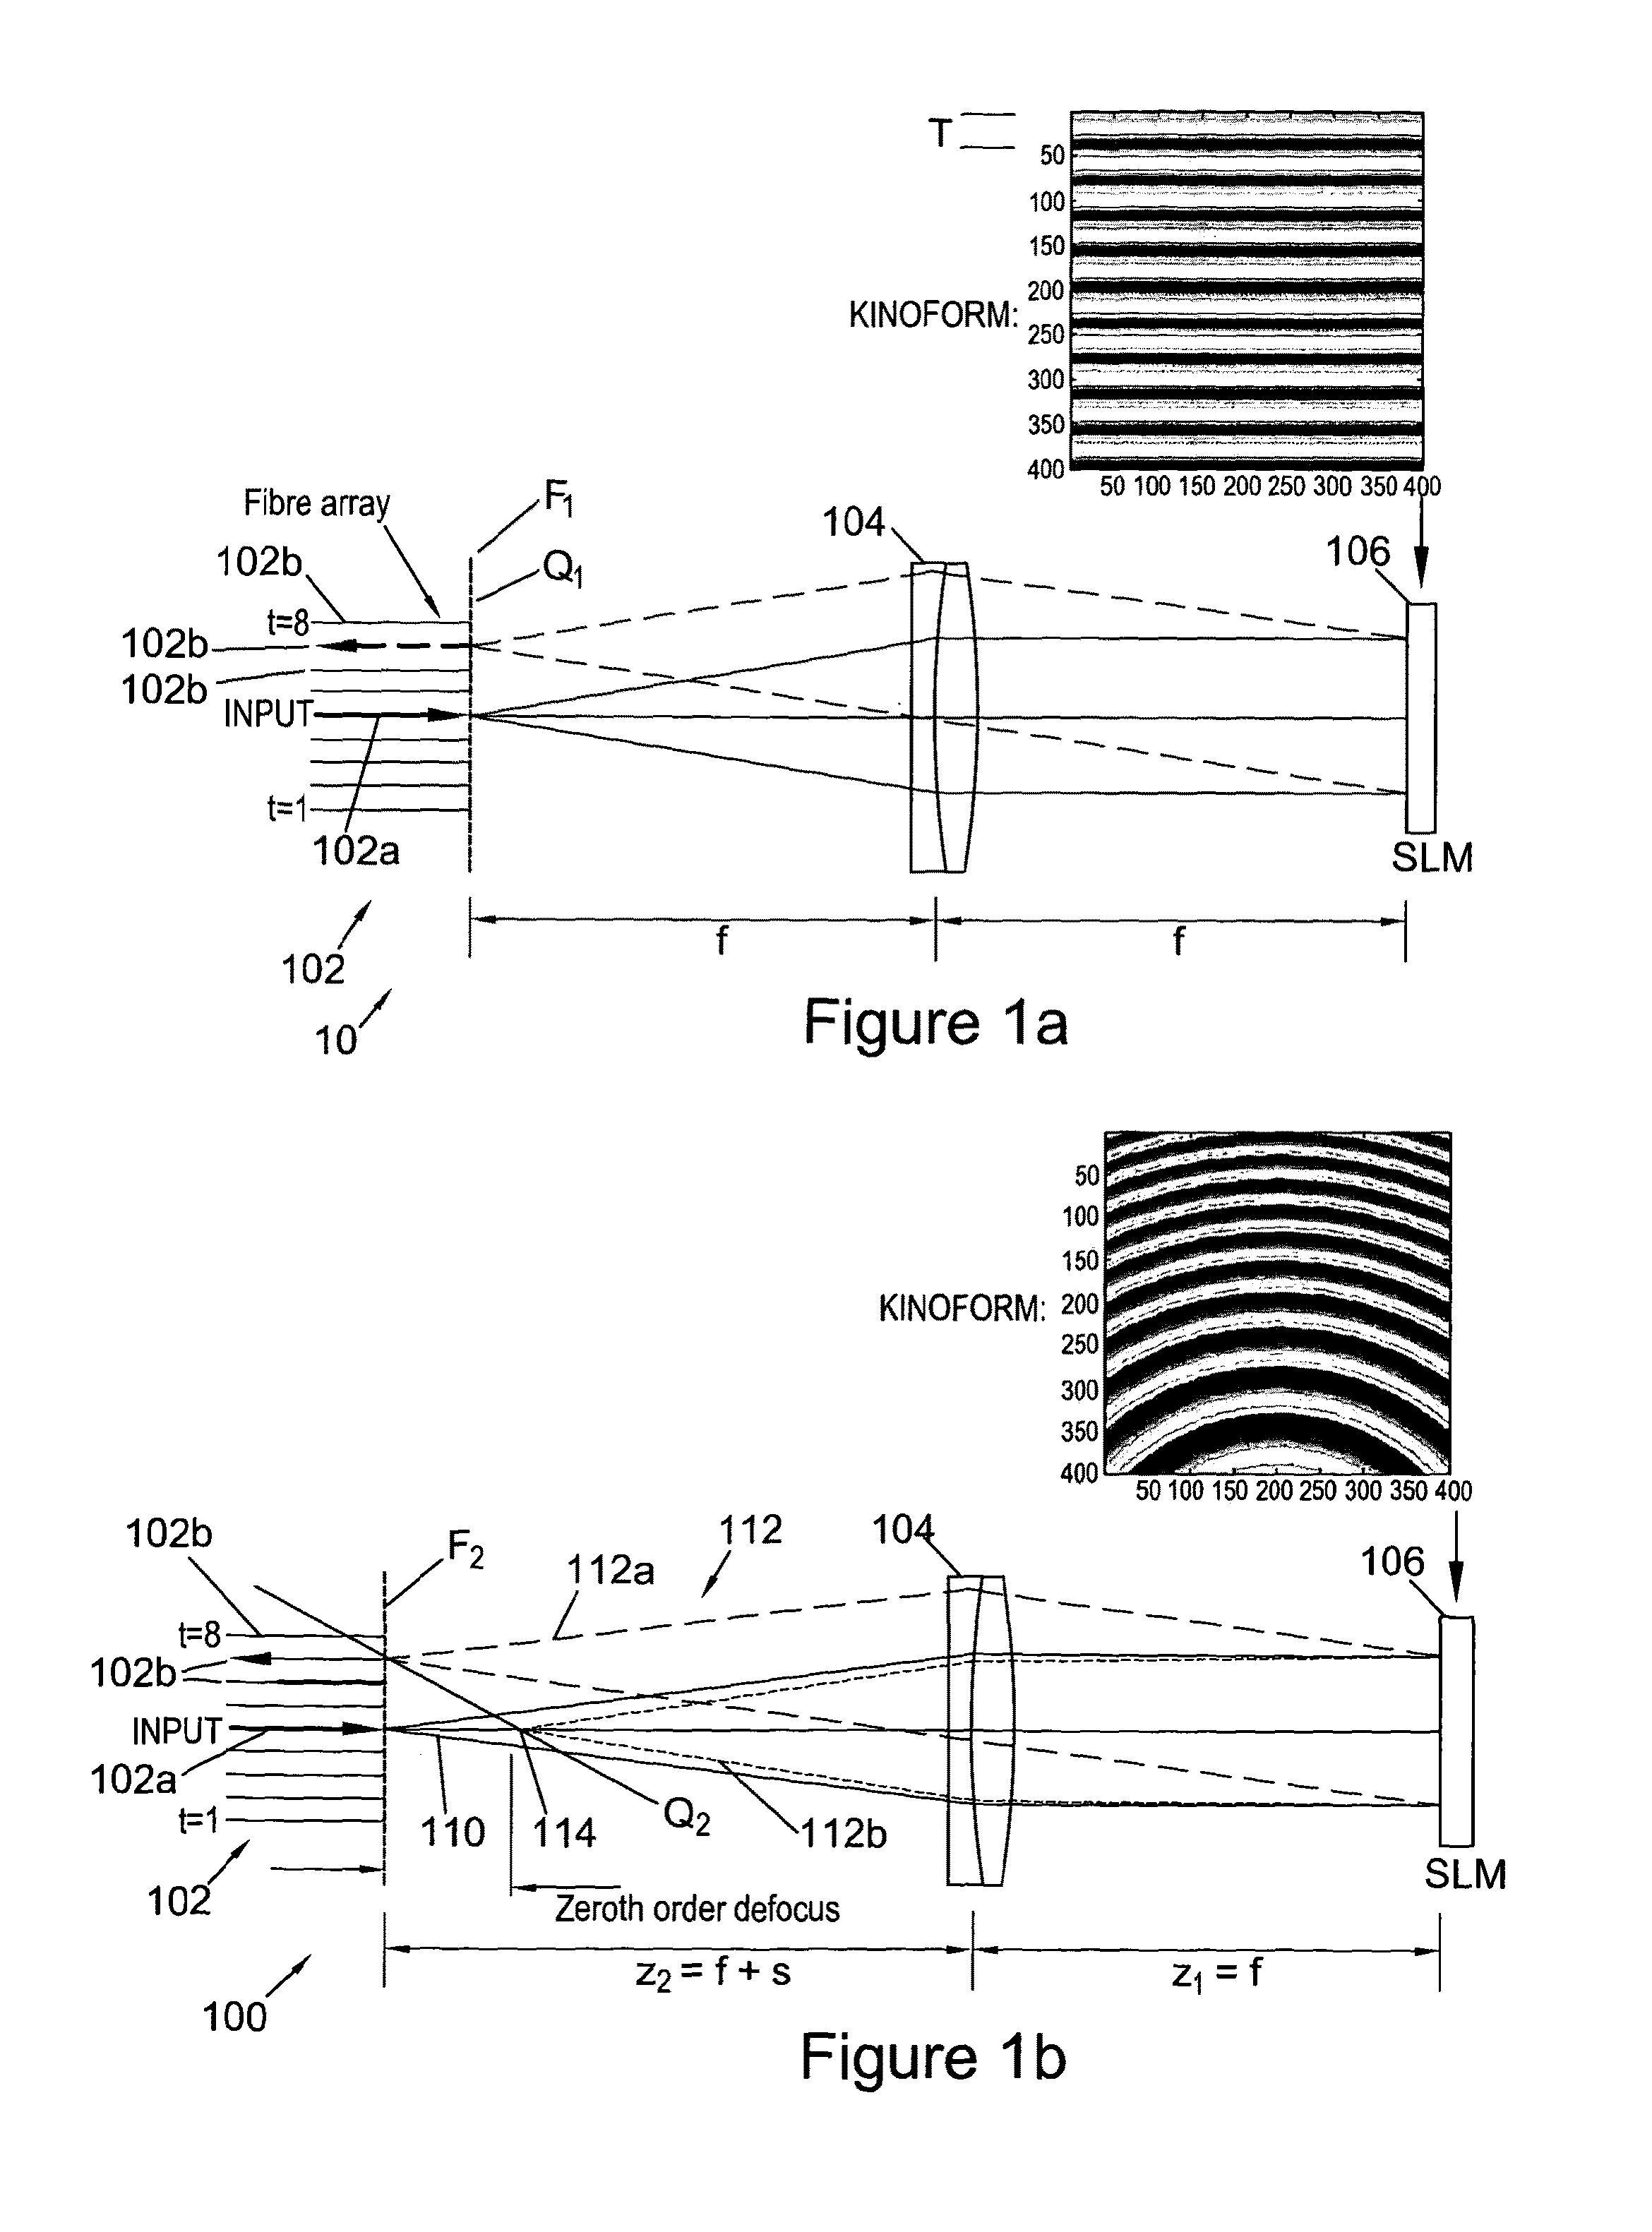 Optical beam routing apparatus and methods